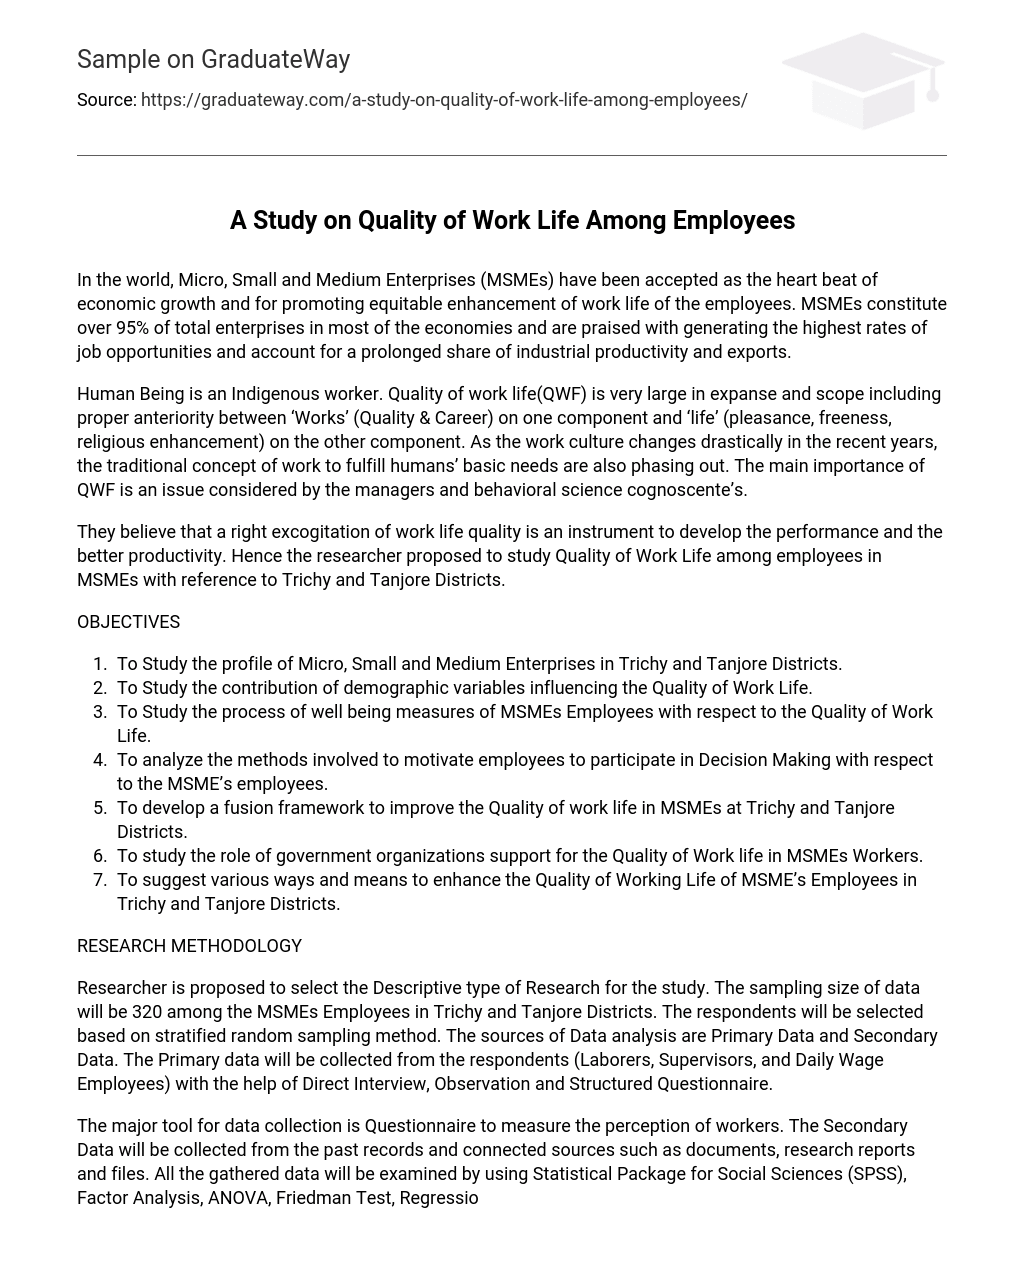 A Study on Quality of Work Life Among Employees